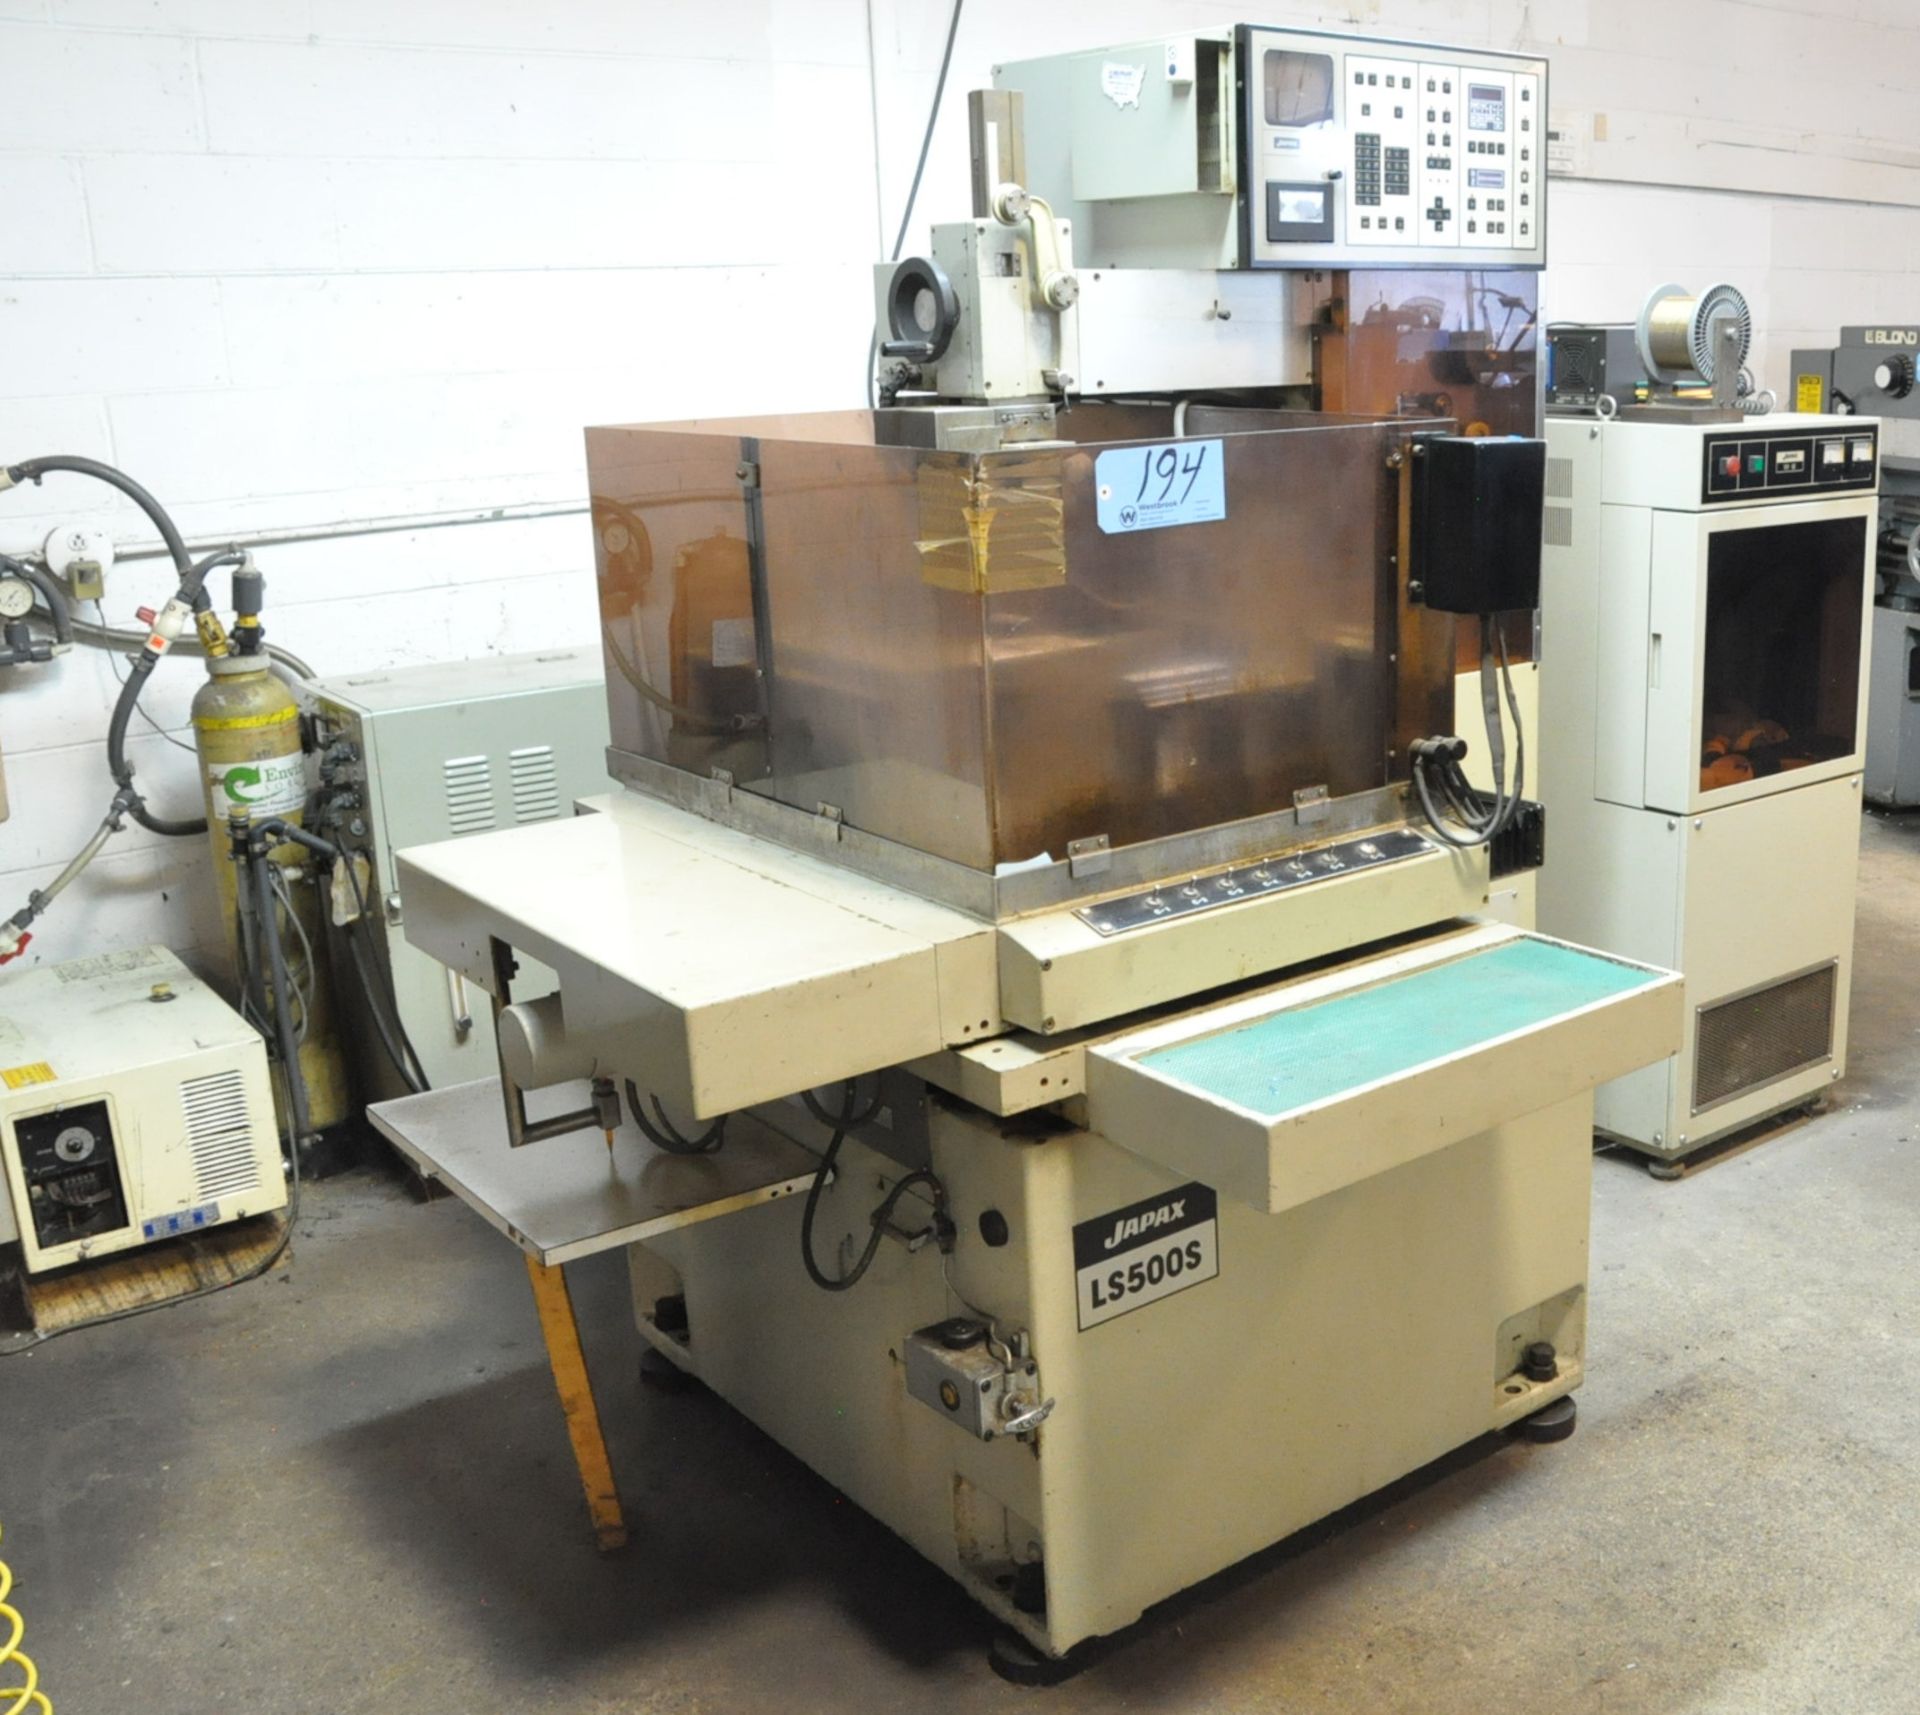 Japax JAPT 3F, LS500S, Wire Electrical Discharge Machine - Image 2 of 11